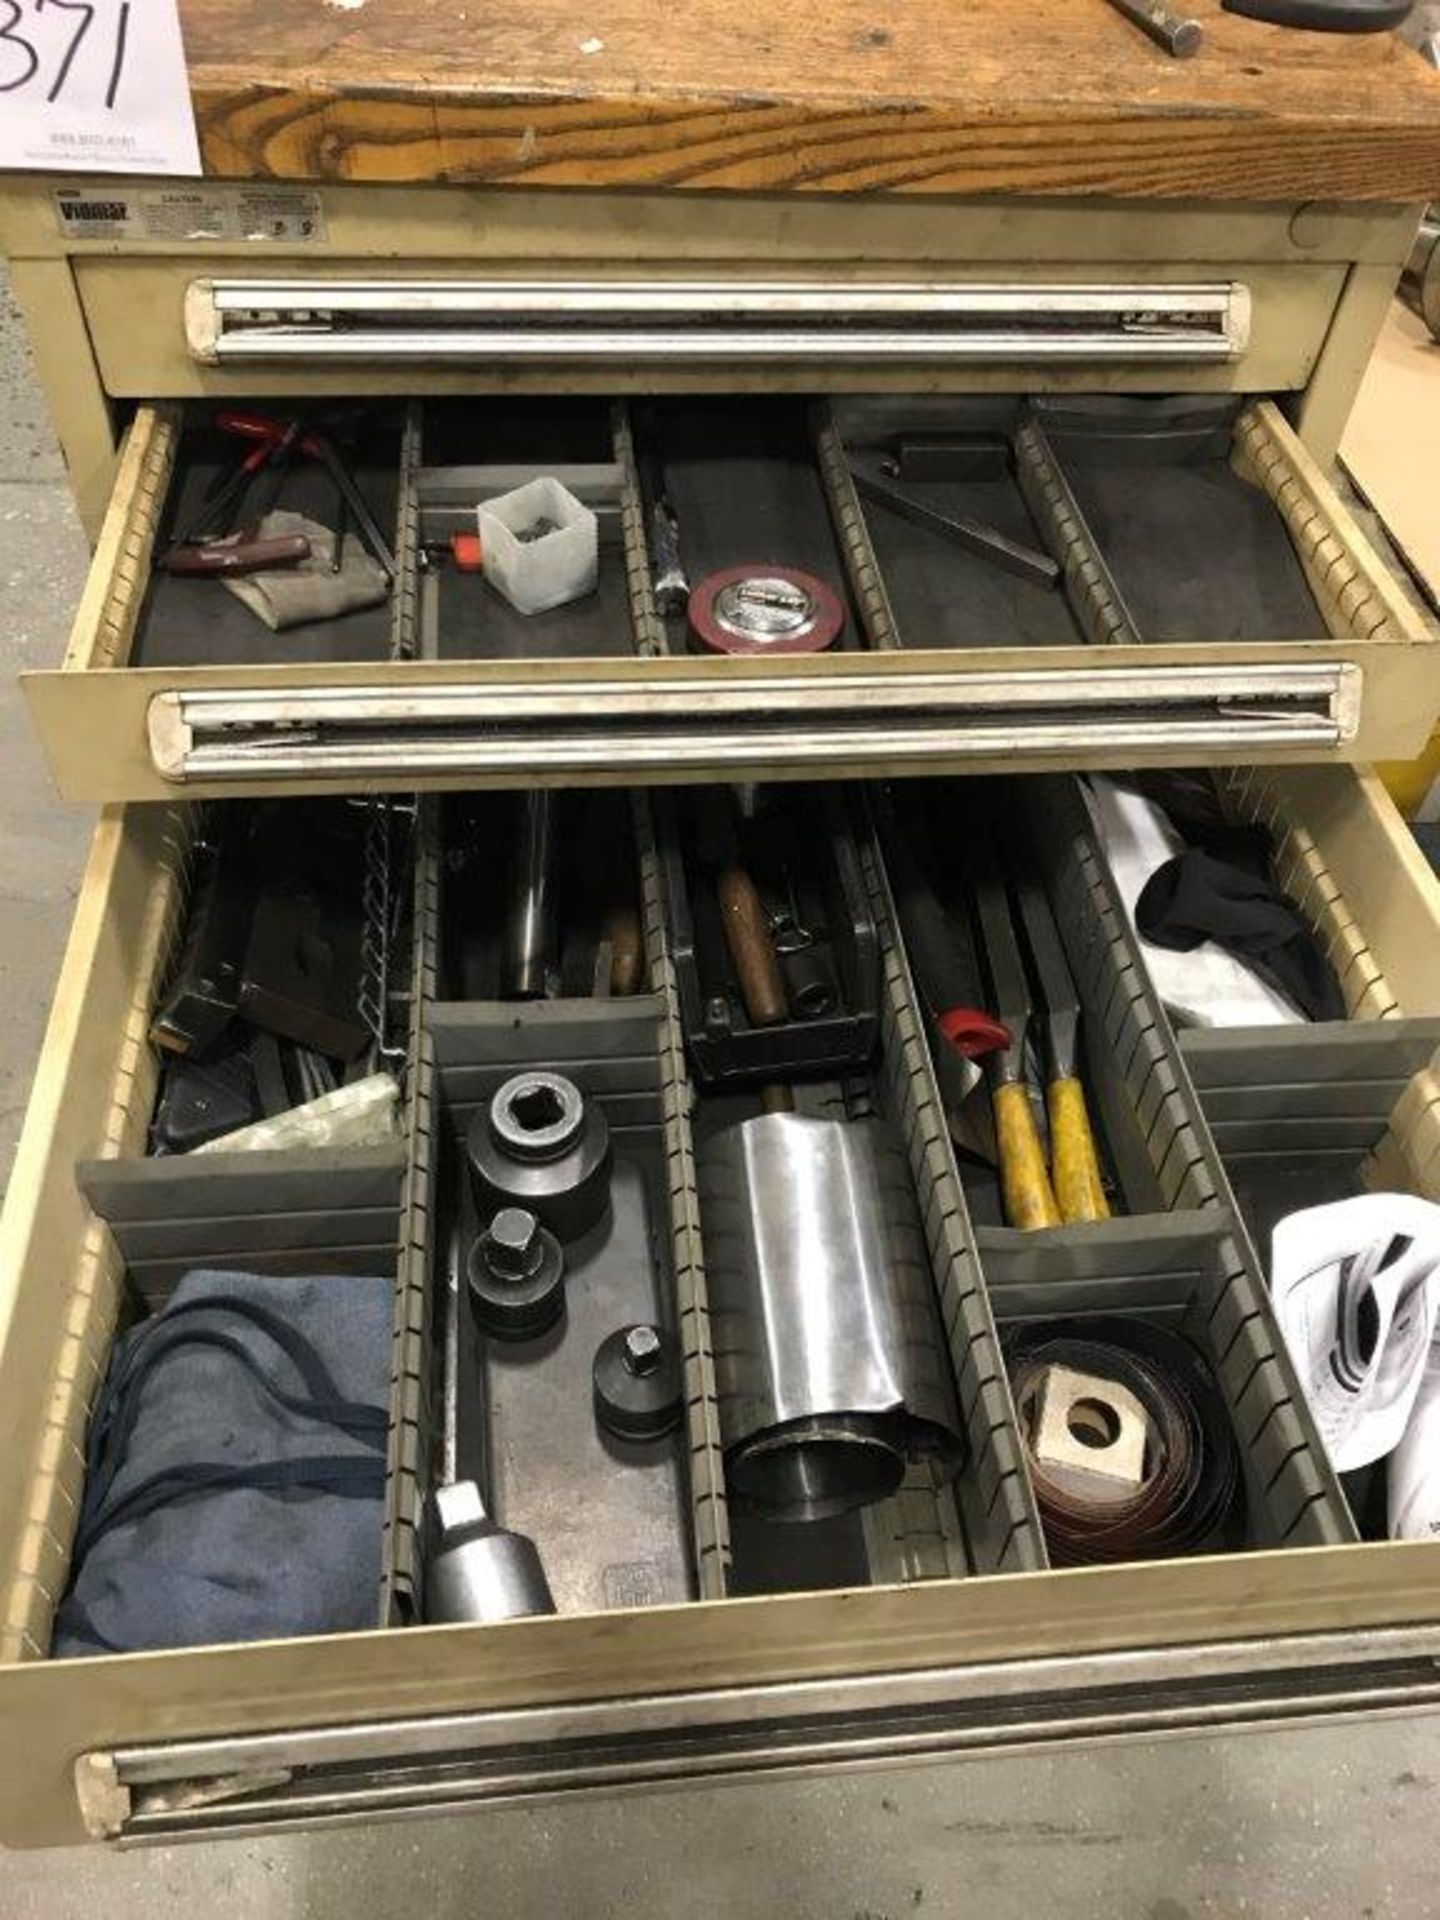 Vidmar (5) Drawer Cabinet with Contents of Misc. Tooling, 30" x 28" x 46" Tall - Image 2 of 3